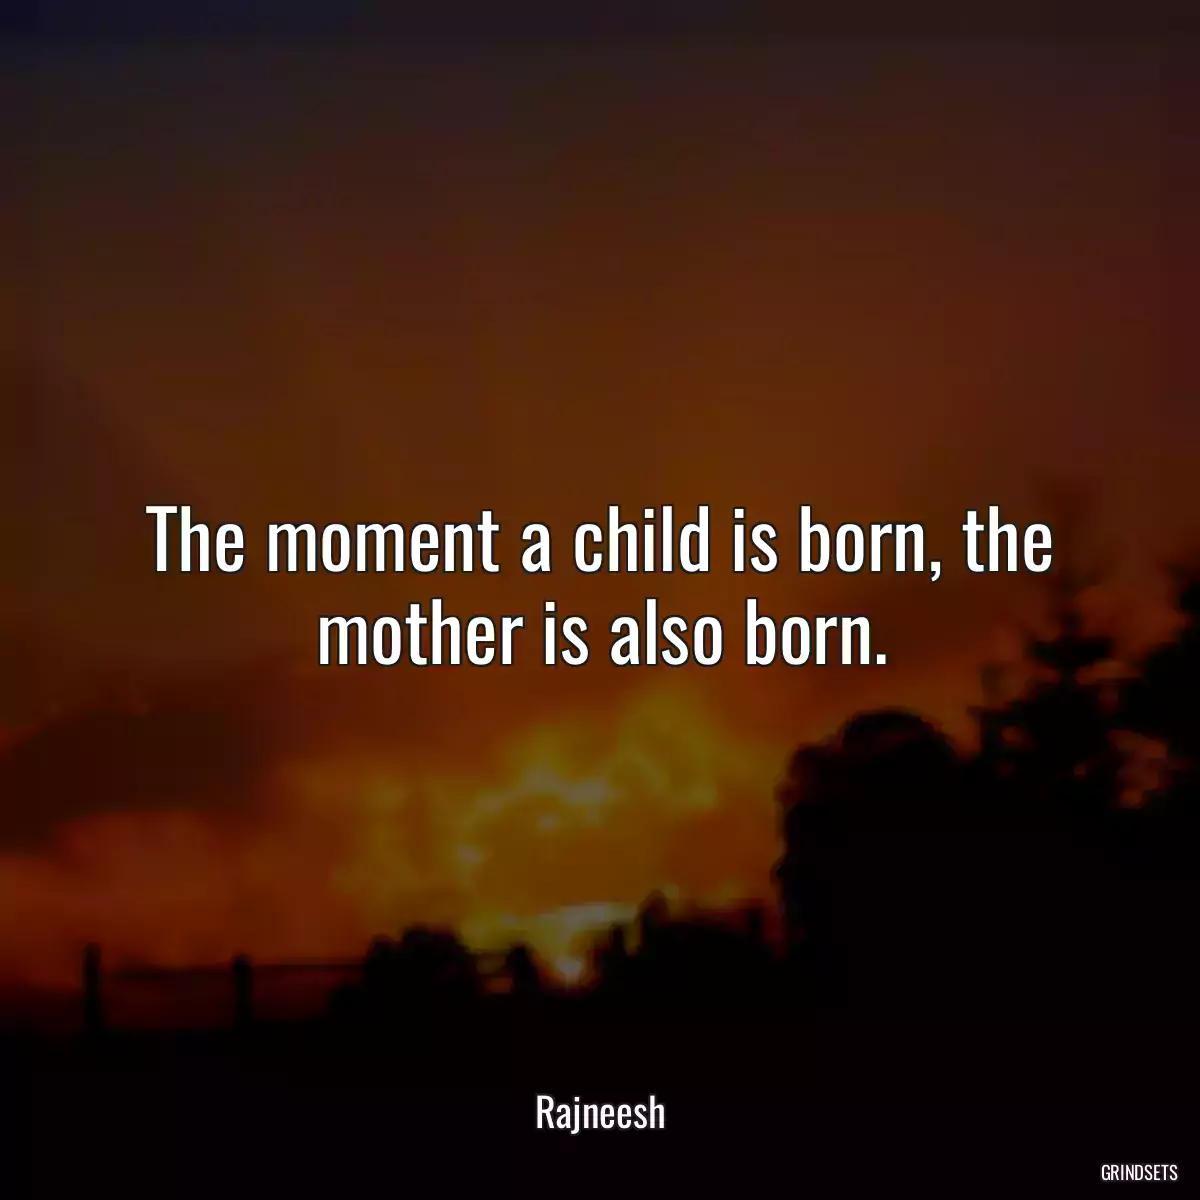 The moment a child is born, the mother is also born.